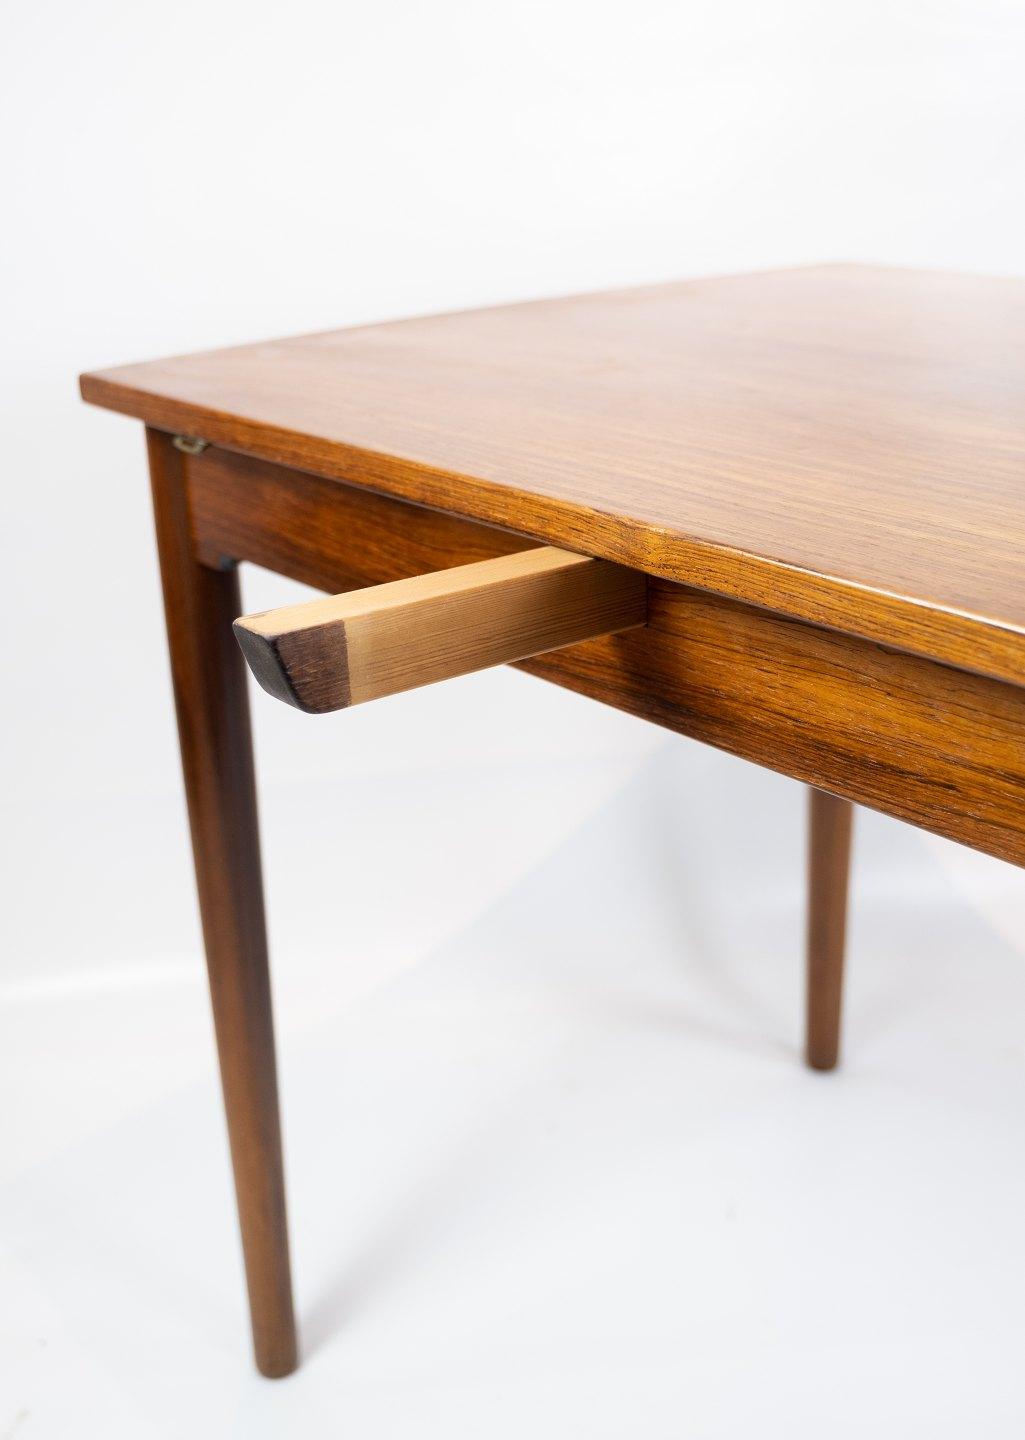 Smaller Dining Table in Rosewood with Extentions of Danish Design from the 1960s For Sale 3